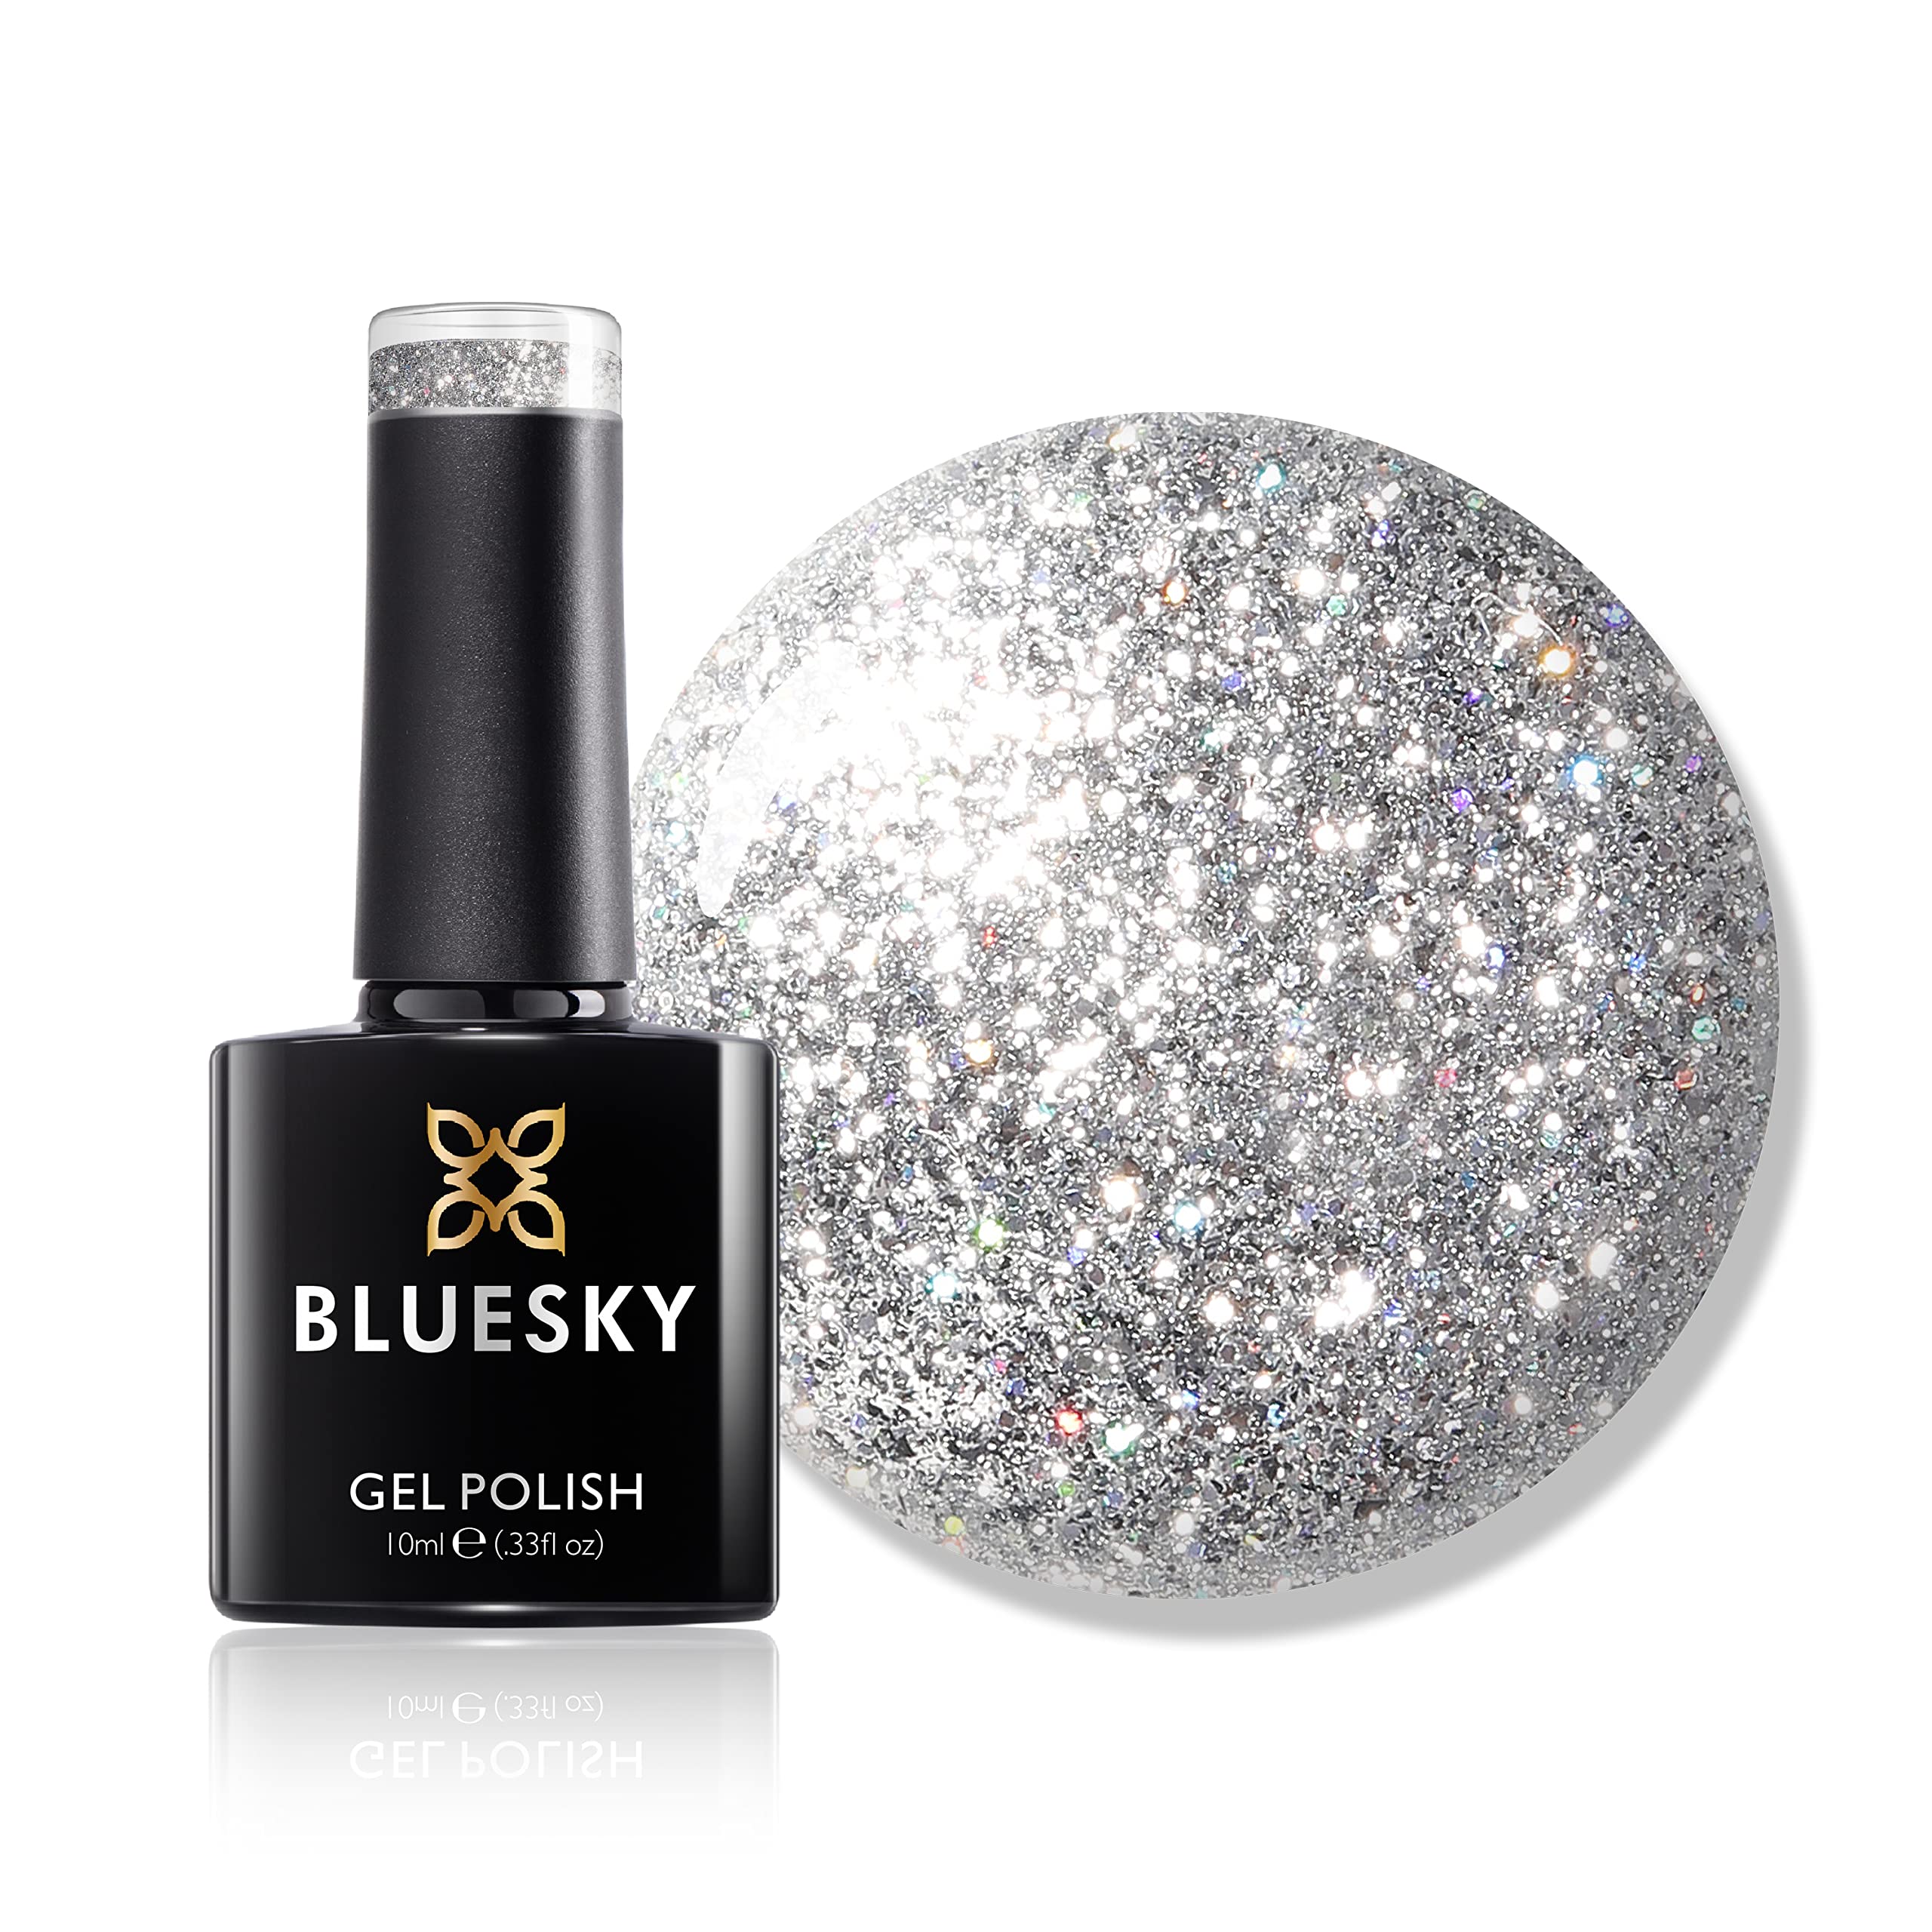 Bluesky Gel Nail Polish, Dazzling Platinum Gel BDP08 - Silver Rally. Silver Glitter, 10ml (Requires curing under UV or LED Lamp)